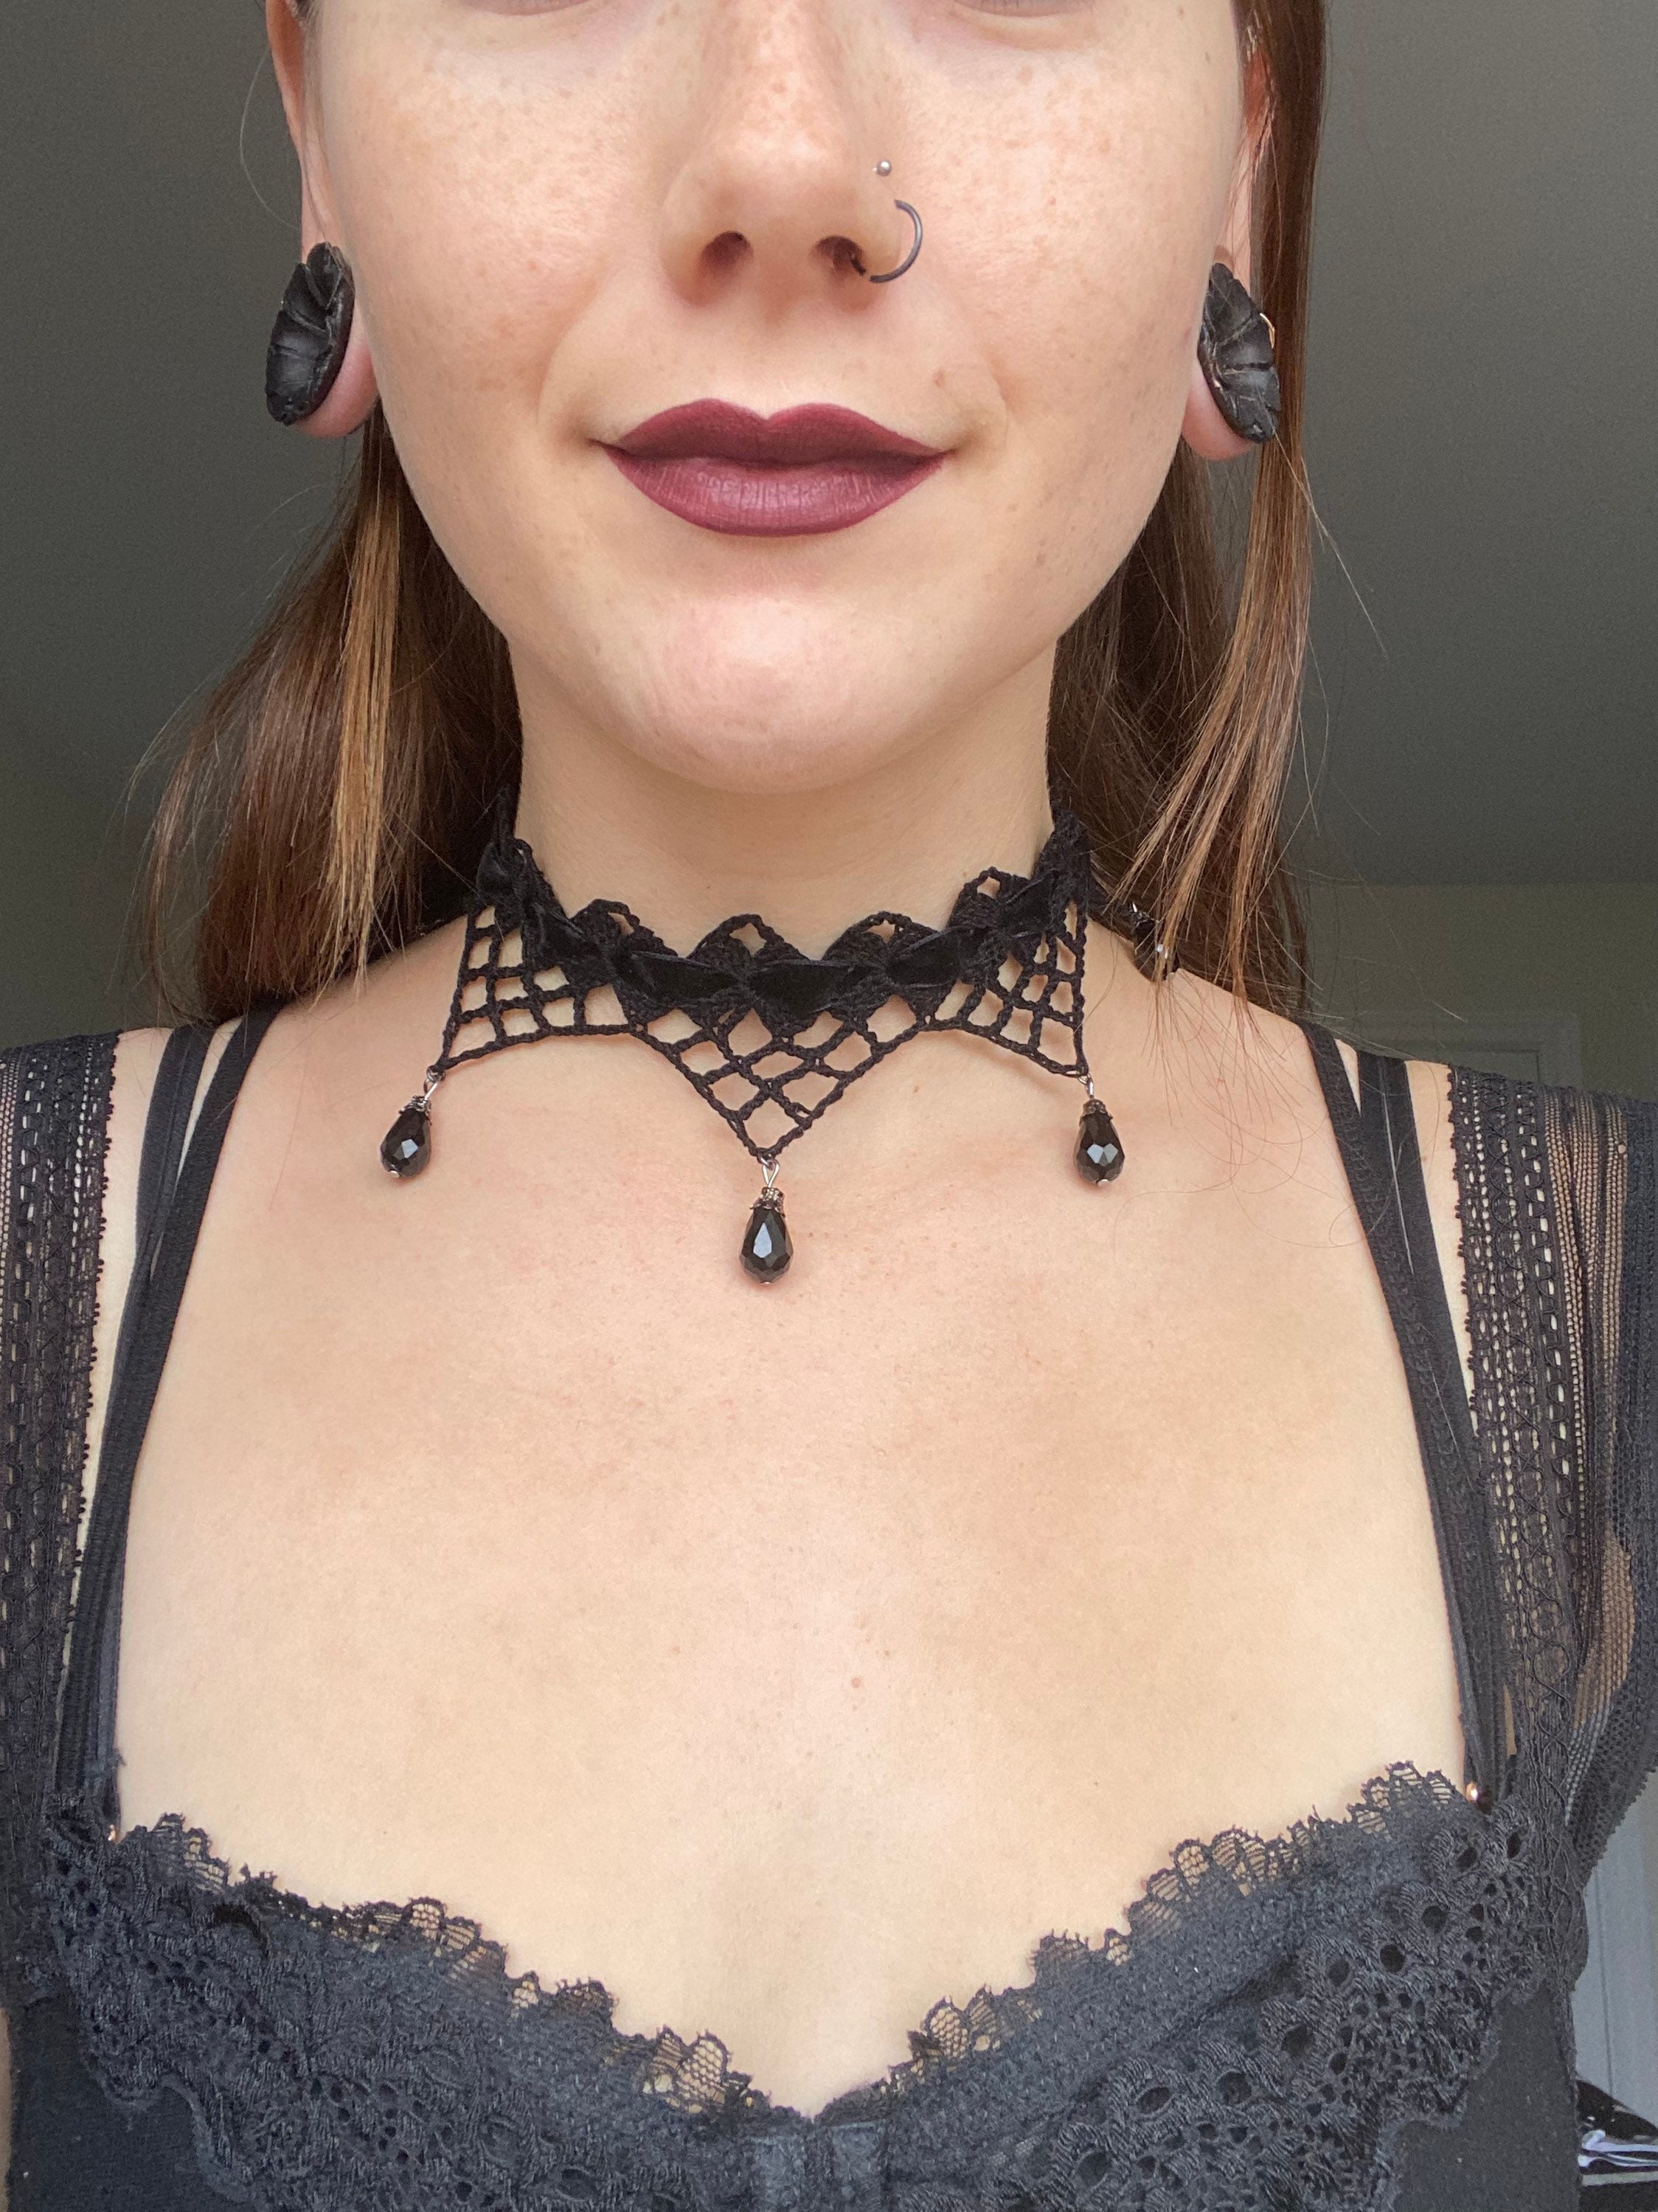 Black Choker Necklace, Chokers, Gothic Necklaces, Jewelry 